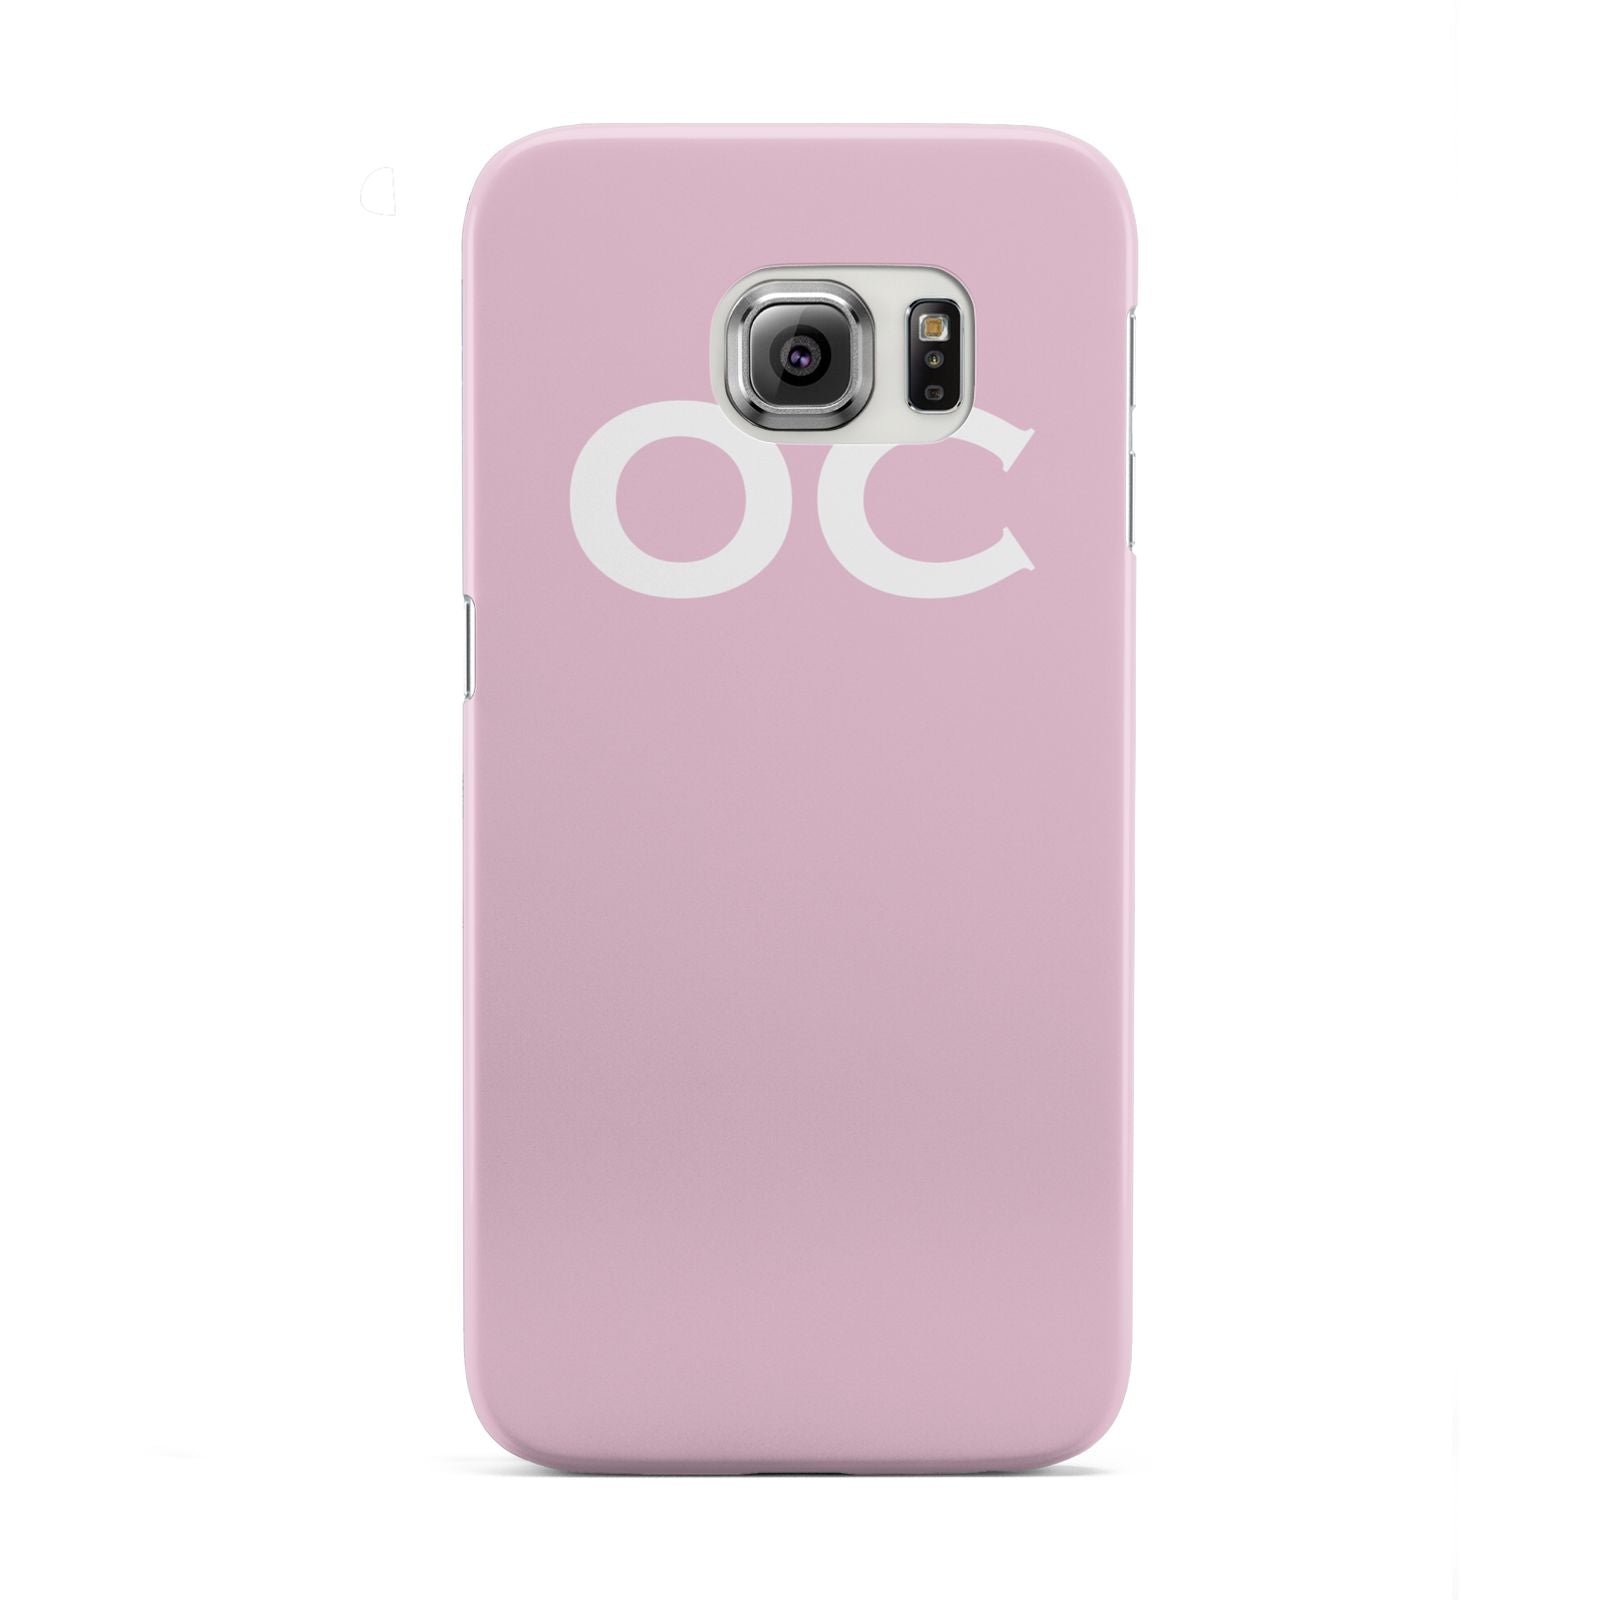 Personalised Initials 2 Samsung Galaxy S6 Edge Case